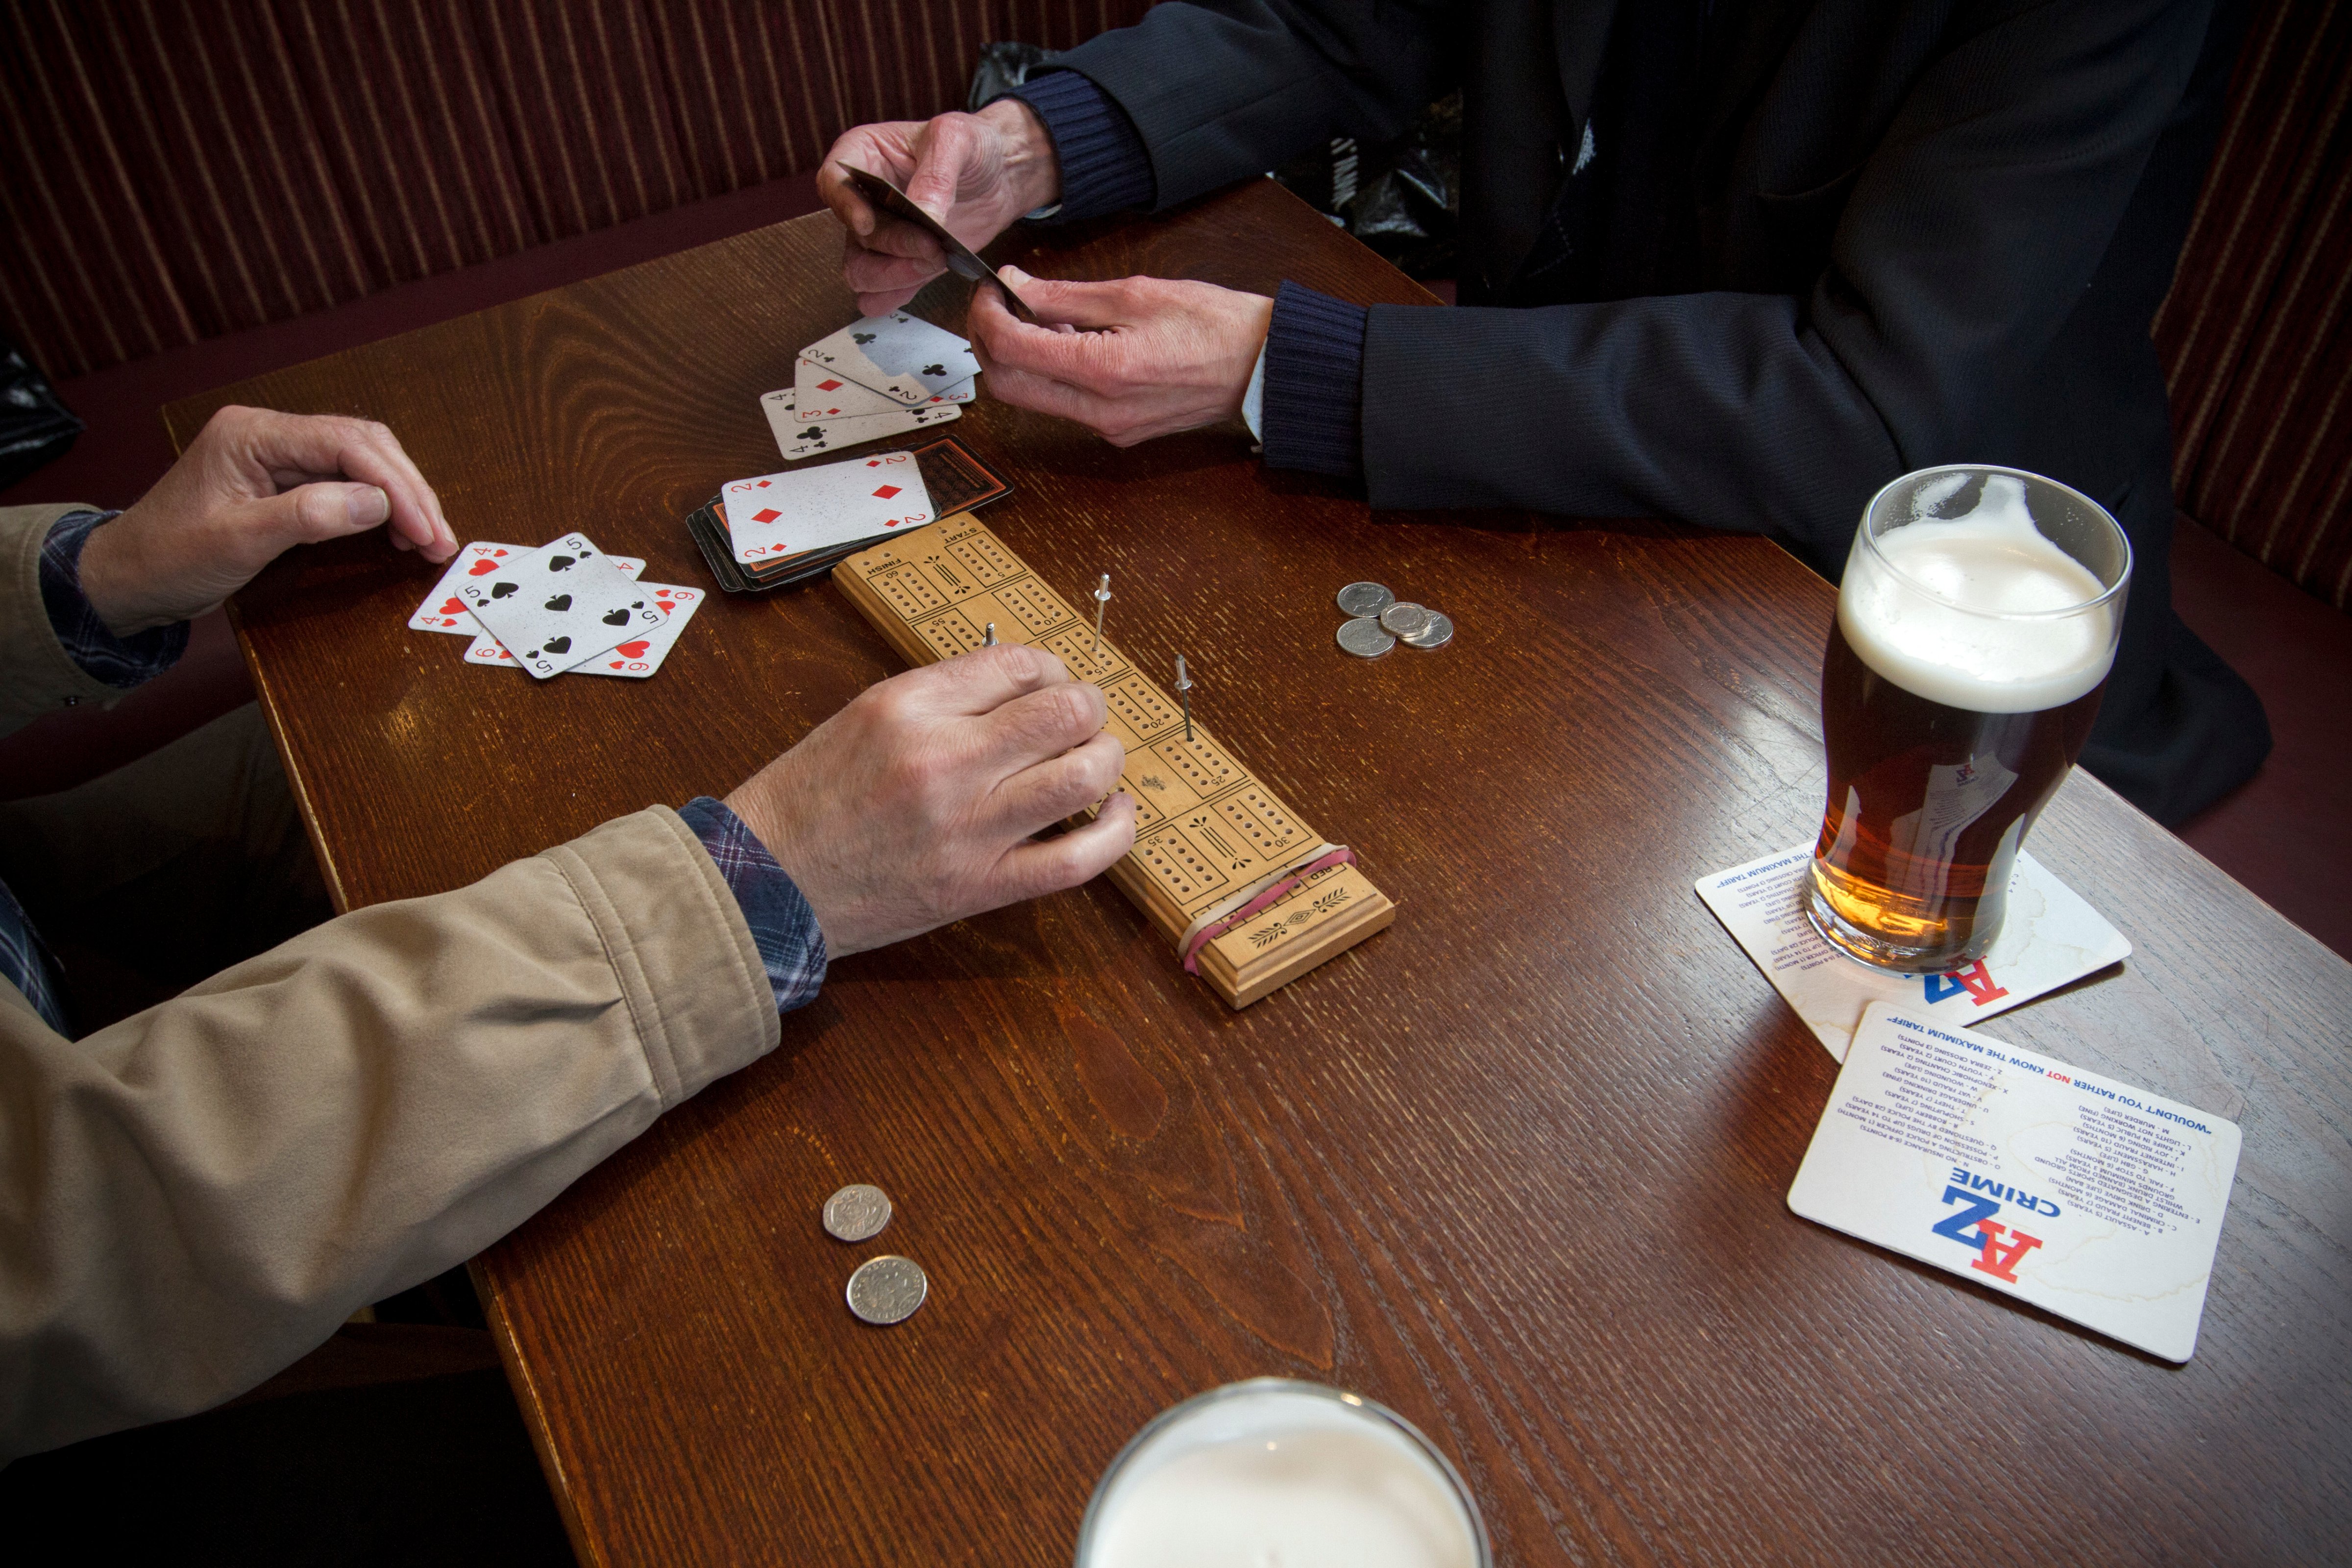 Regulars playing cribbage at the Mowbray in Failsworth, Oldham, Greater Manchester. The pub is owned by Amber Taverns, who reopened in four years ago after the building was previously a public house but had been vacant for a number of years. (Colin McPherson—Corbis via Getty Images)